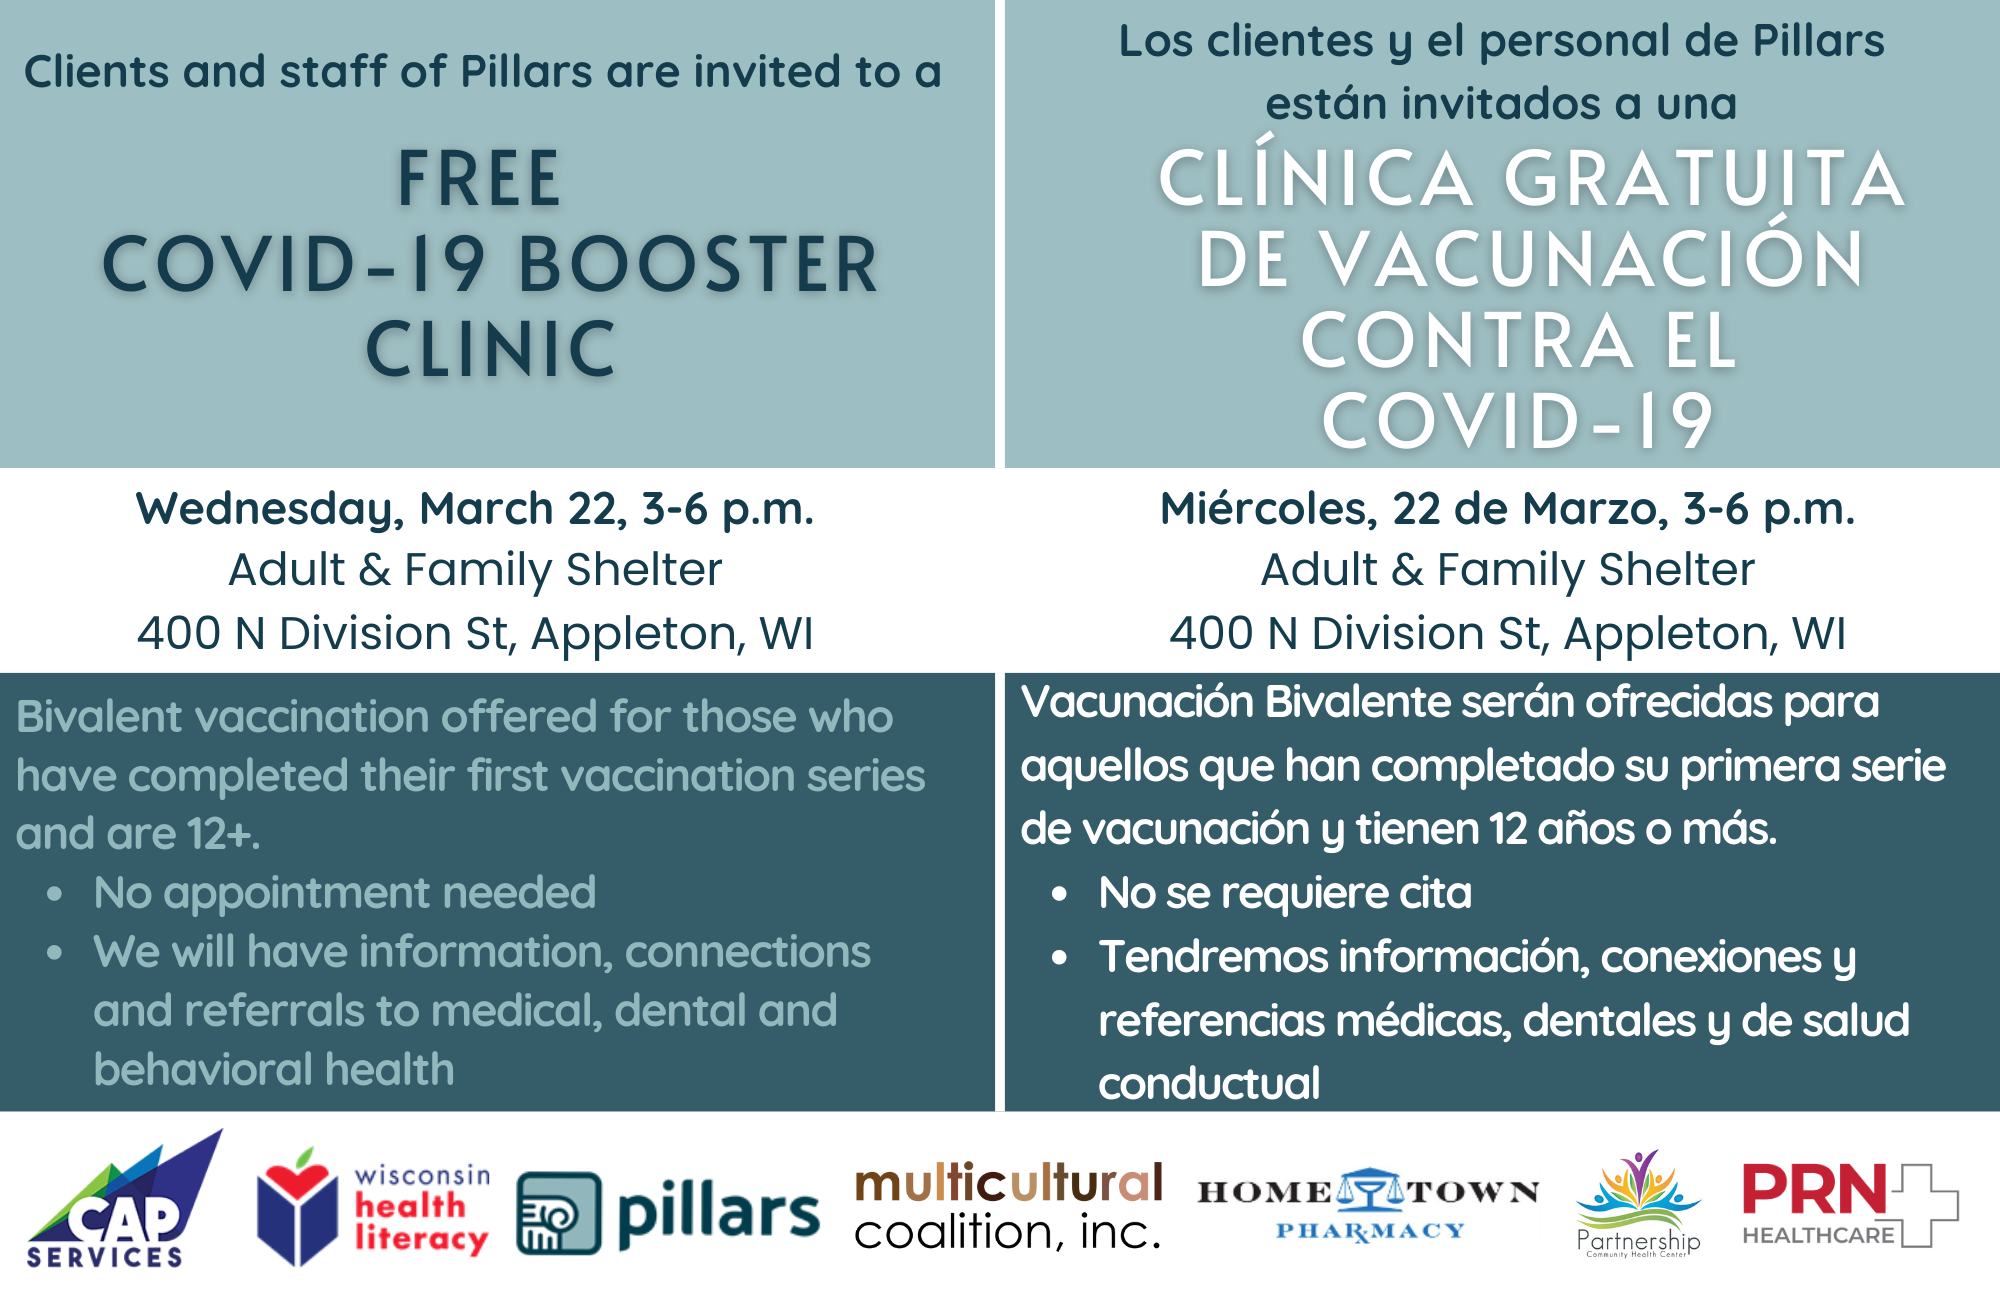 English and Spanish text on blue and white background to promote a clinic event for COVID-19 boosters